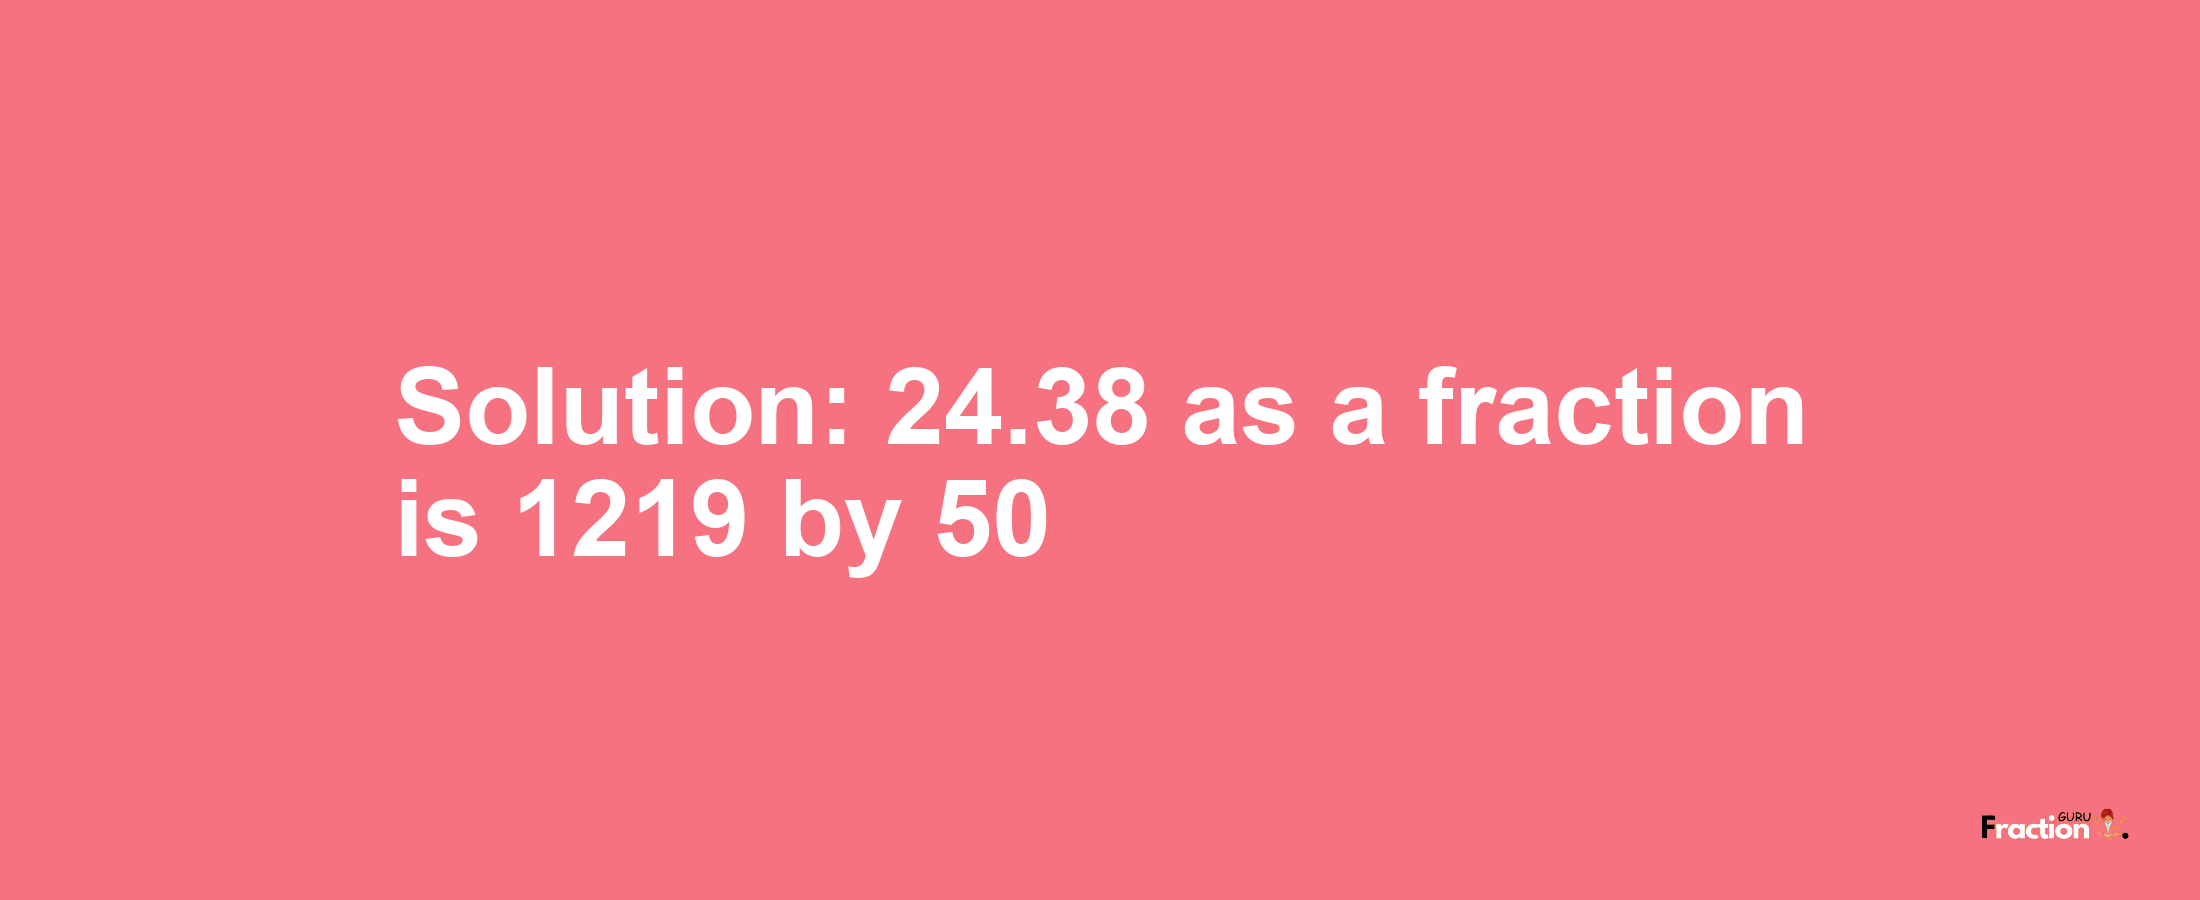 Solution:24.38 as a fraction is 1219/50